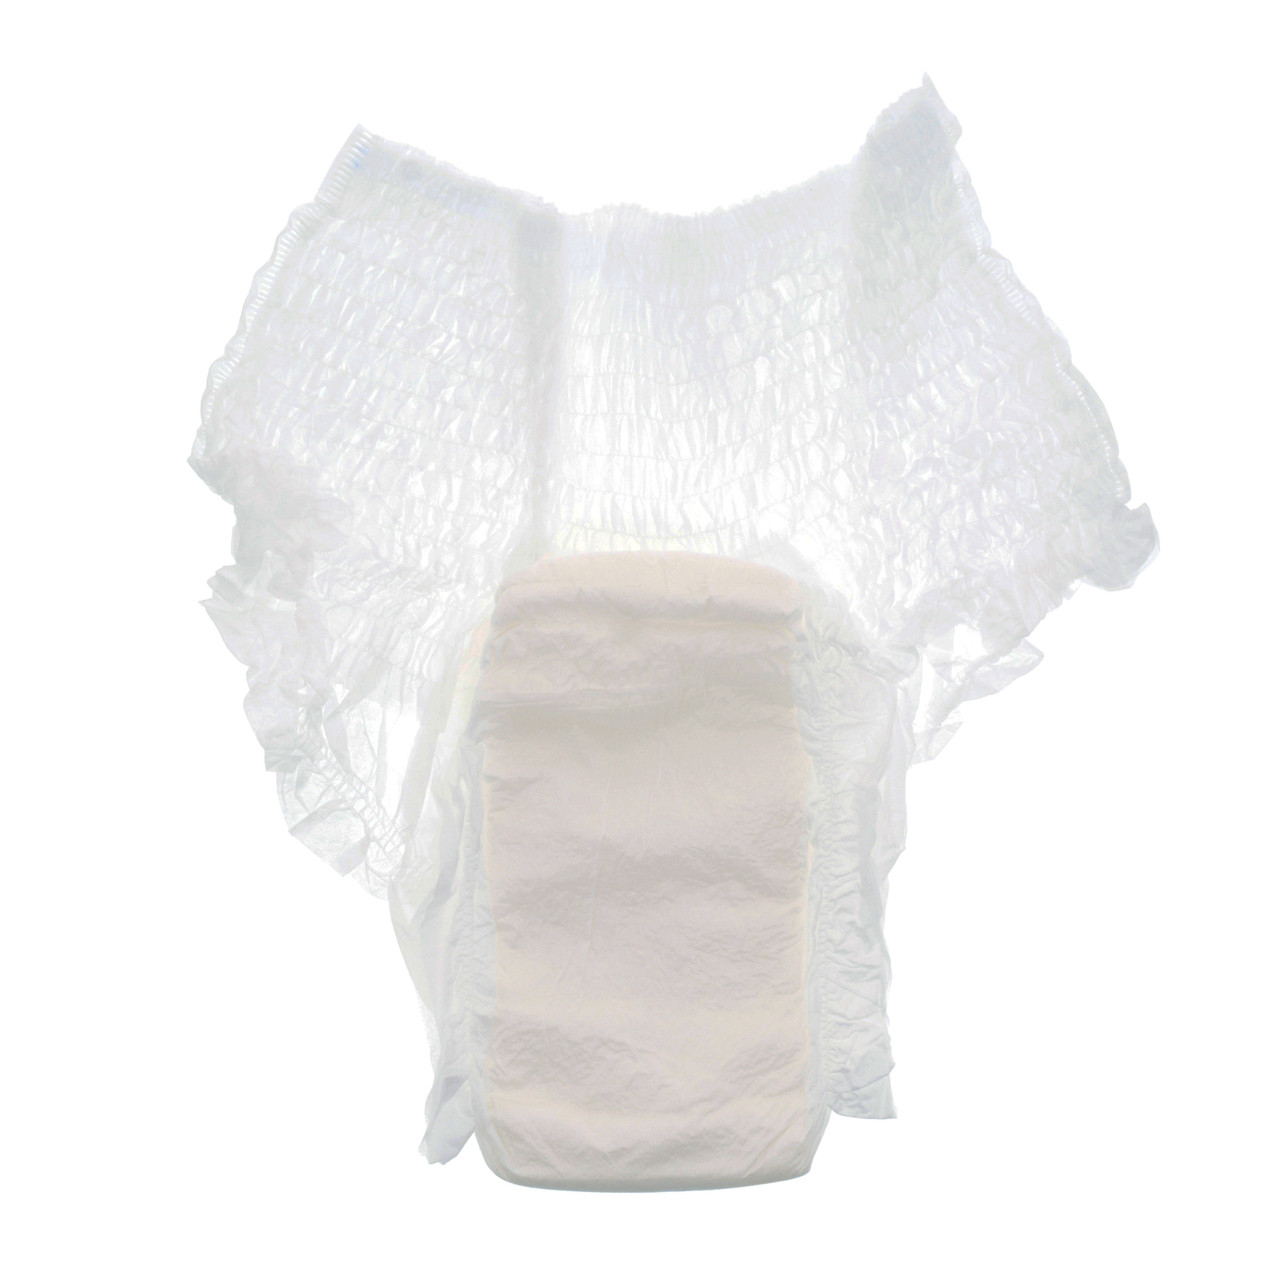 Simplicity Unisex Adult Disposable Underwear, Moderate Absorbency, White,  Large, 44 to 54 Inch Waist #1845